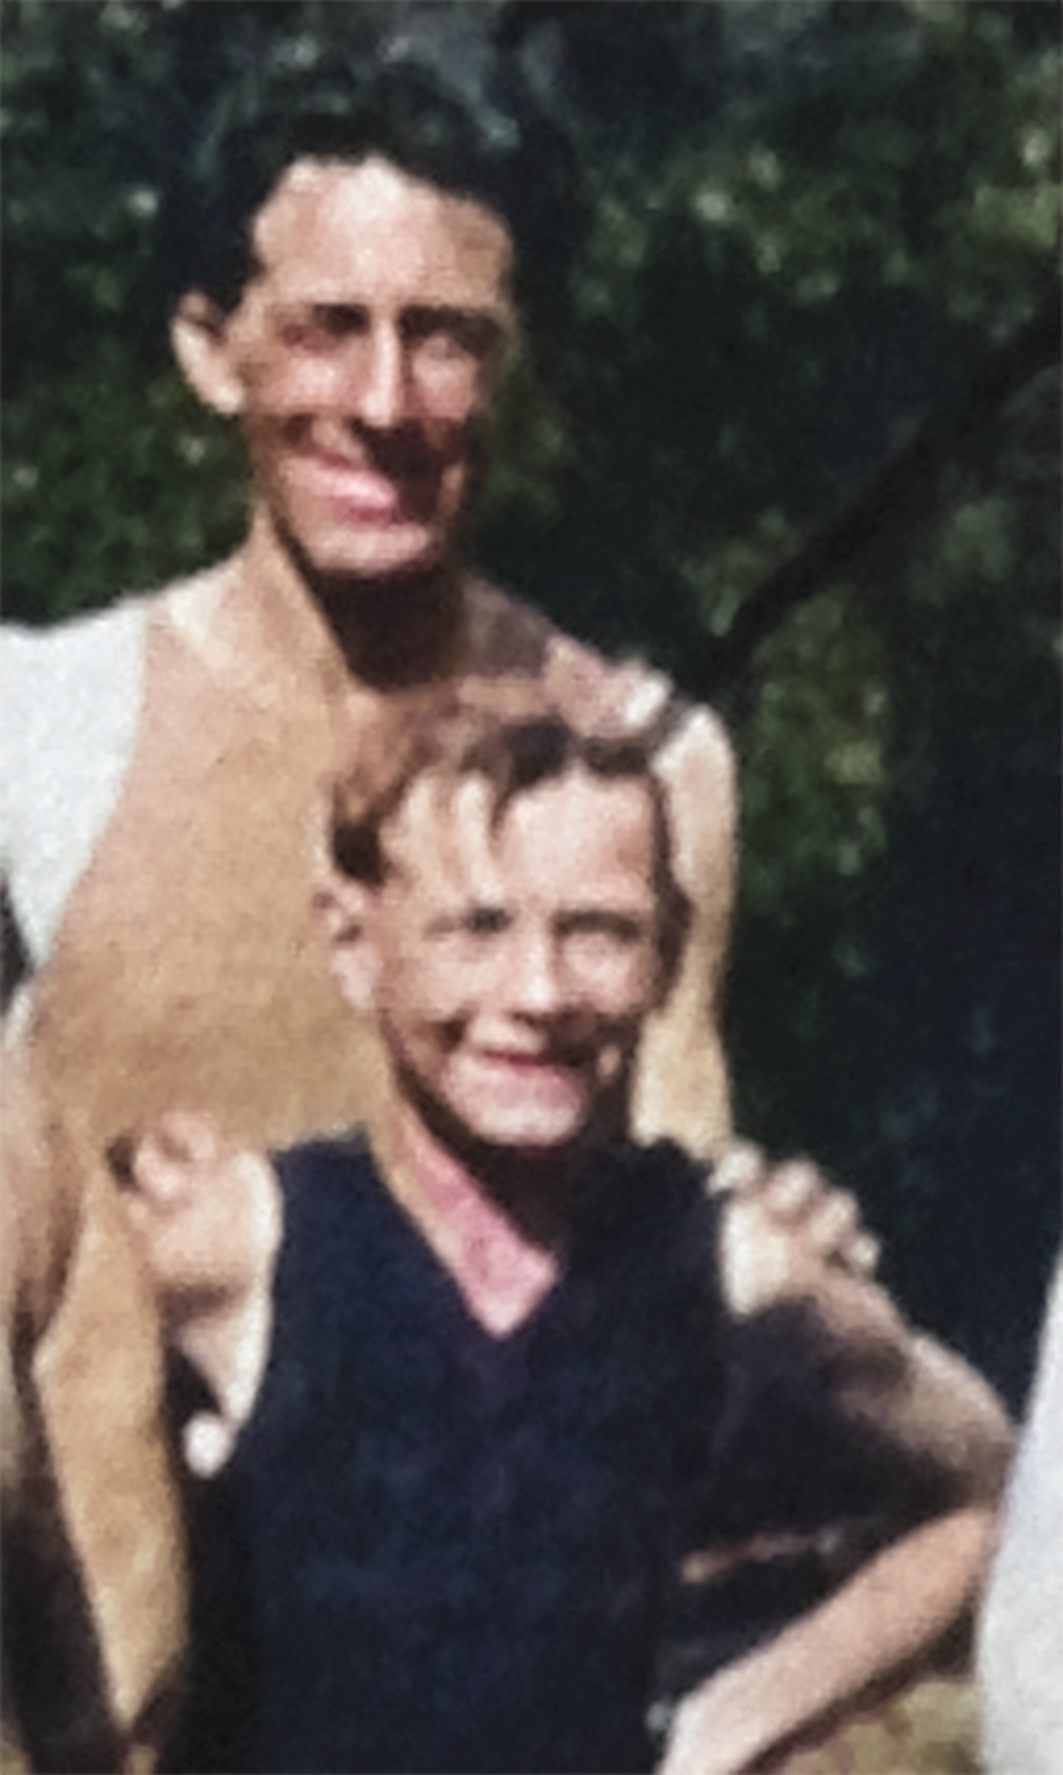 A colorized photograph of J.G. Tierney and his son Patrick Tierney standing in front of him. J.G. has his hands on Patrick's shoulders. They are both smiling. J.G. appears to be about 35 years old and Patrick is about 10.